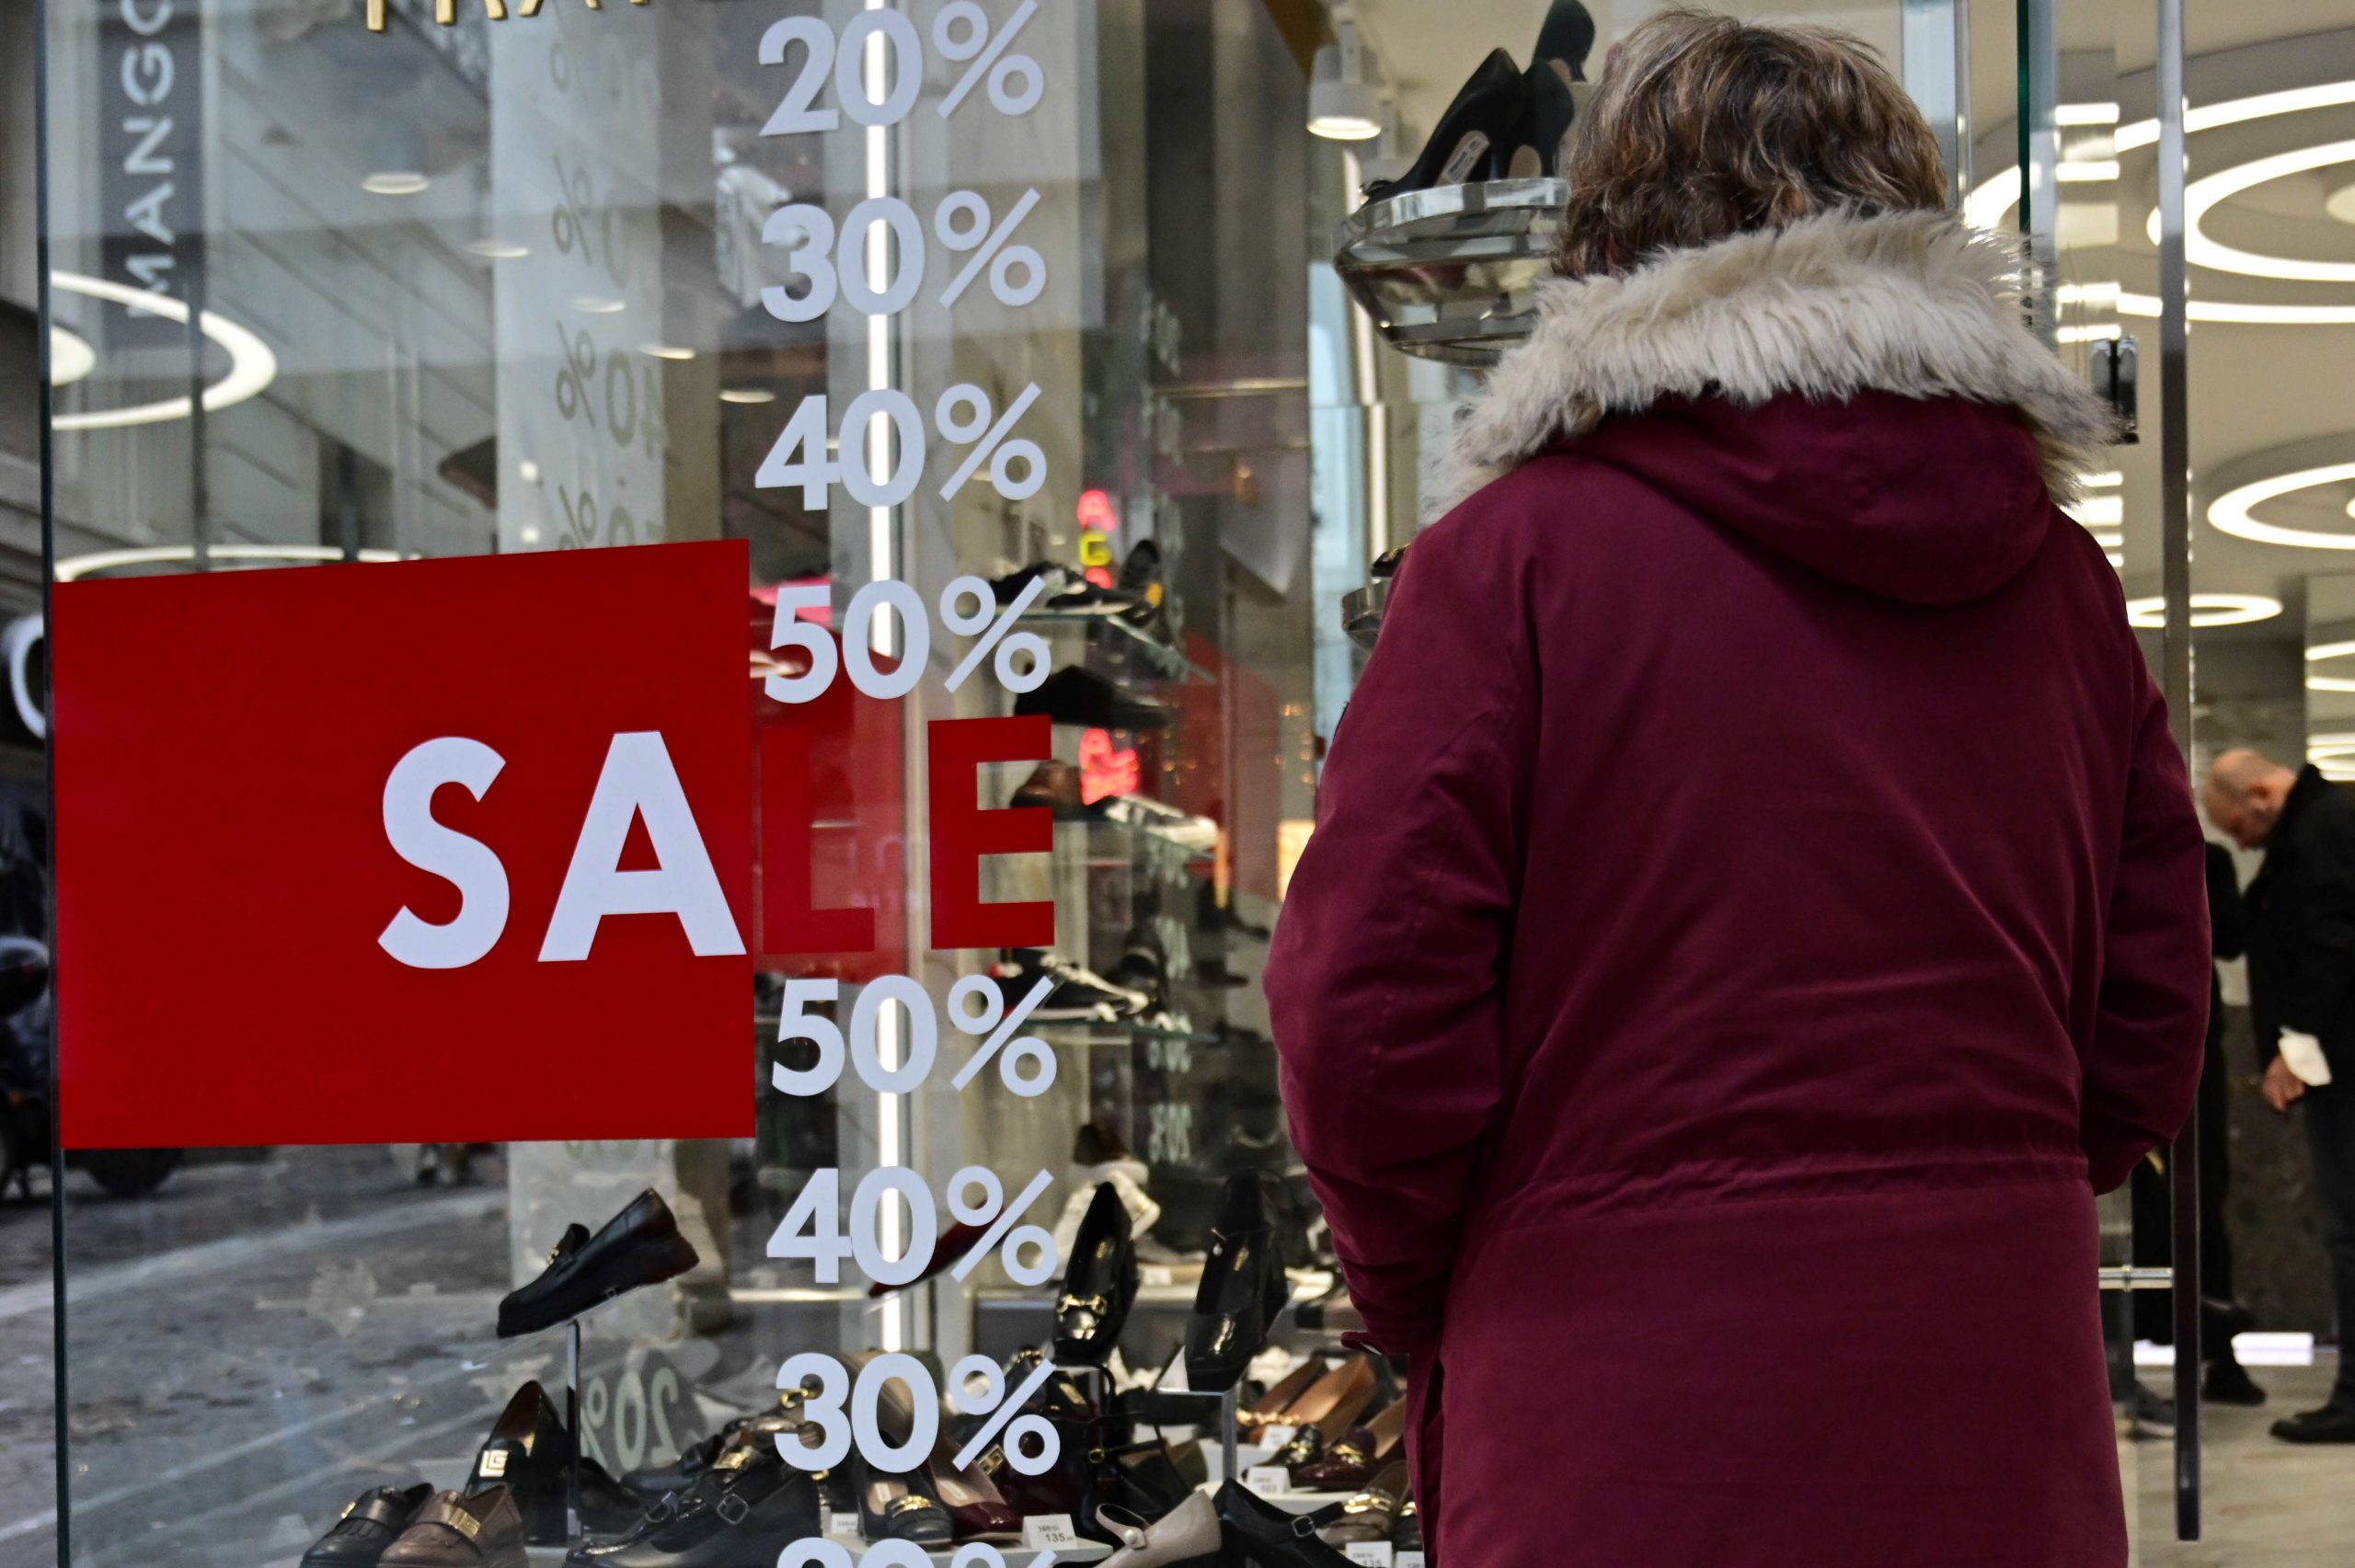 Winter Sales: Lots of Window-shopping but Few Transactions